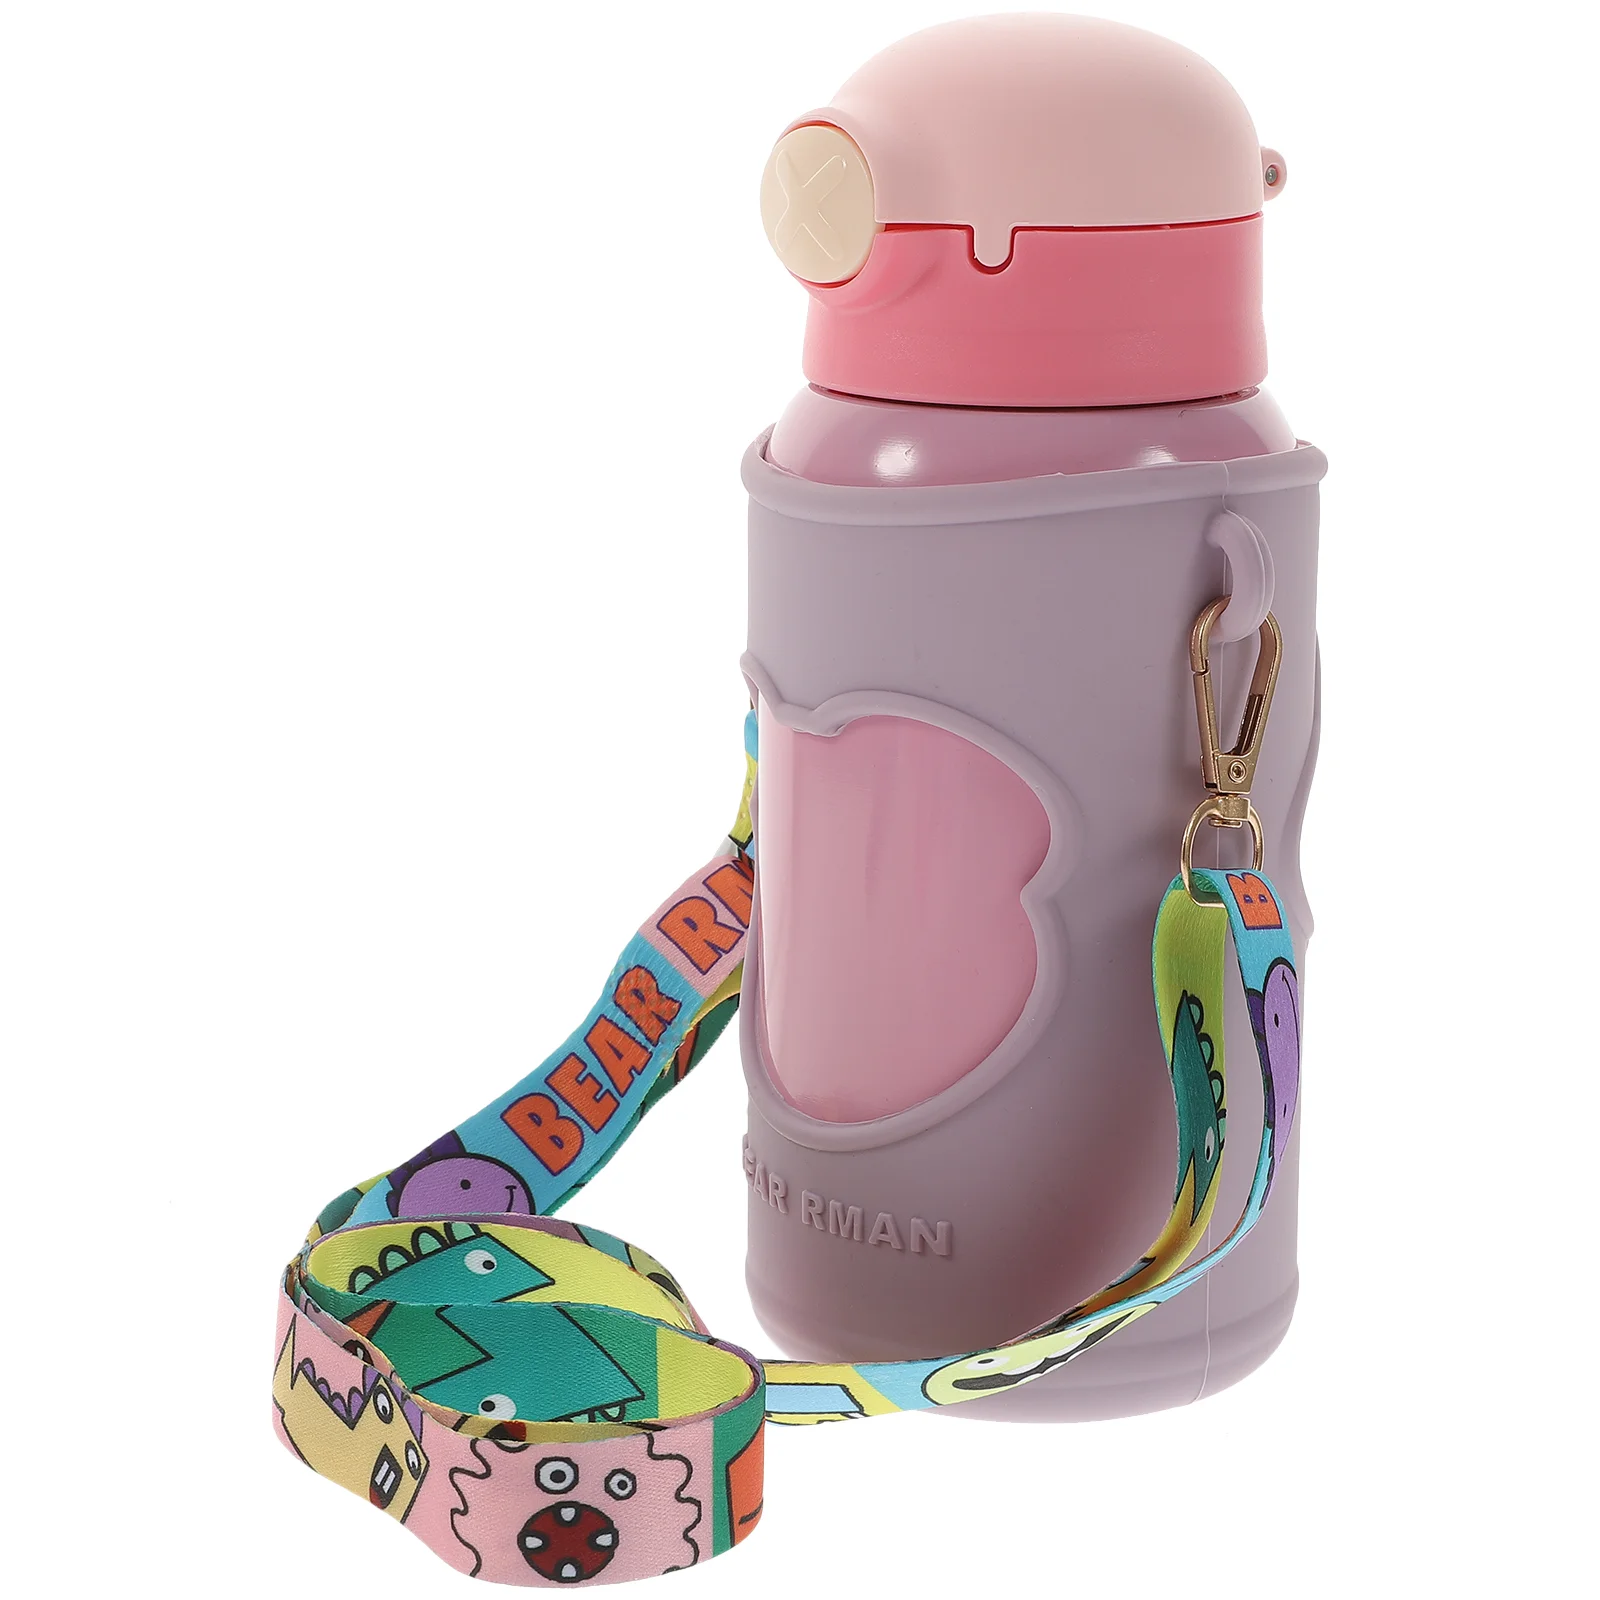 

Water Bottle Container Kids Tumbler Carrier Insulated Spill Cup Insulation Drinks Lidded Canister Proof Pocket Cartoon Toddlers